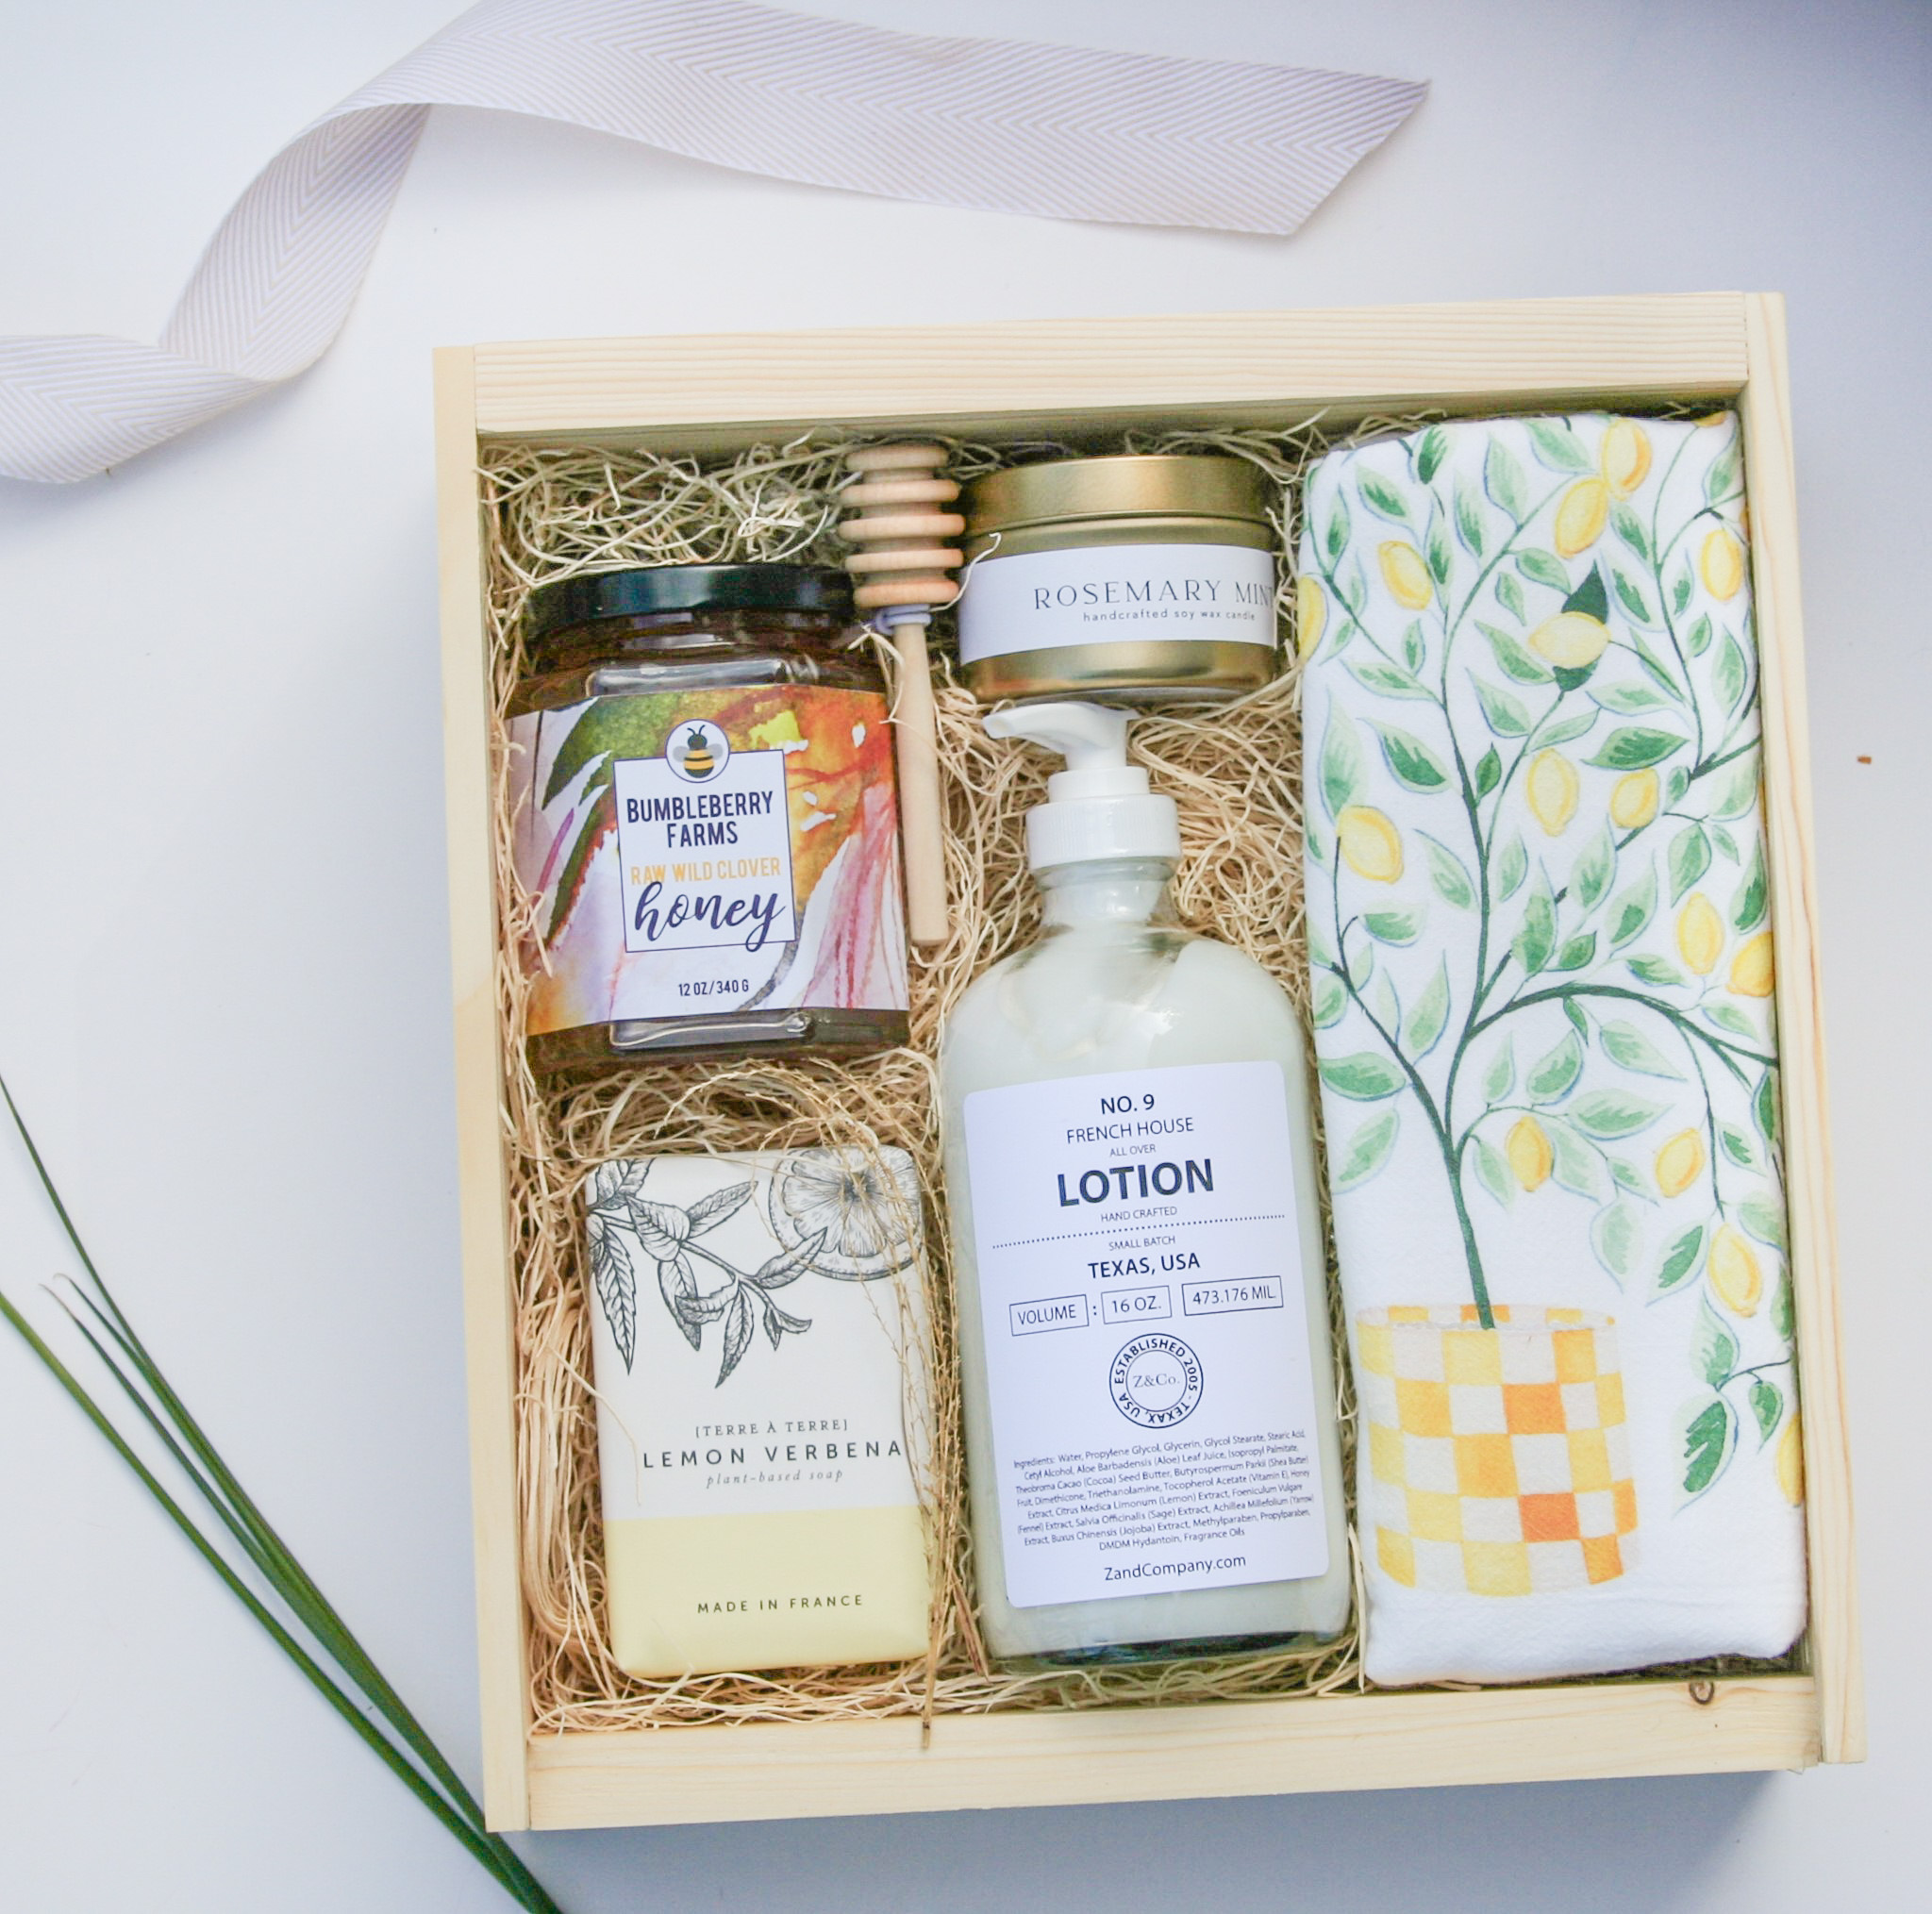 The Home Sweet Home' Curated Gift Box – Gifts for Good